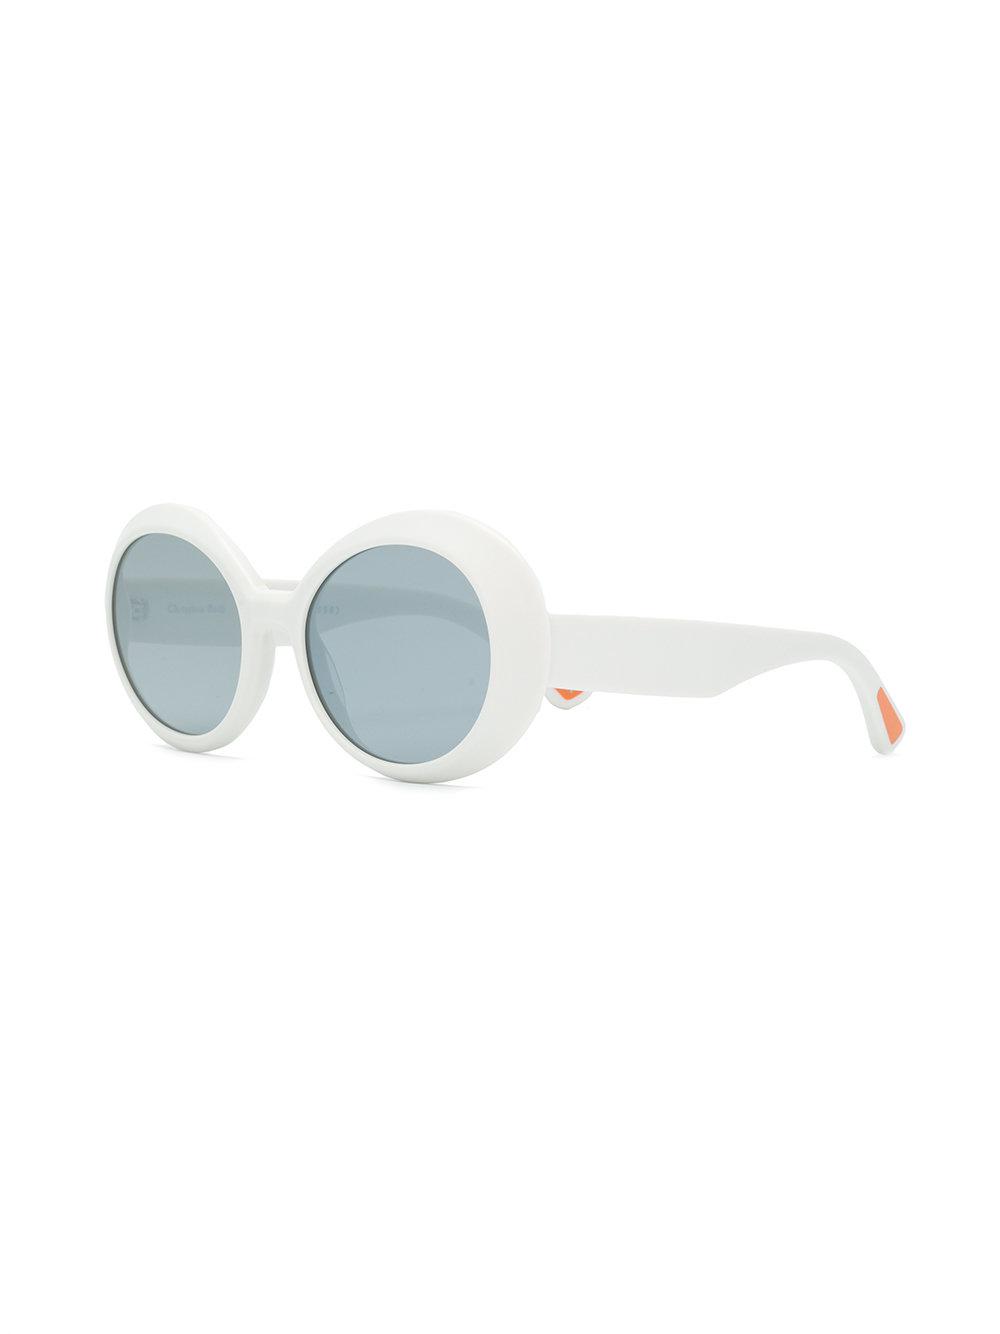 Christian Roth Archive 1993 Sunglasses in White | Lyst